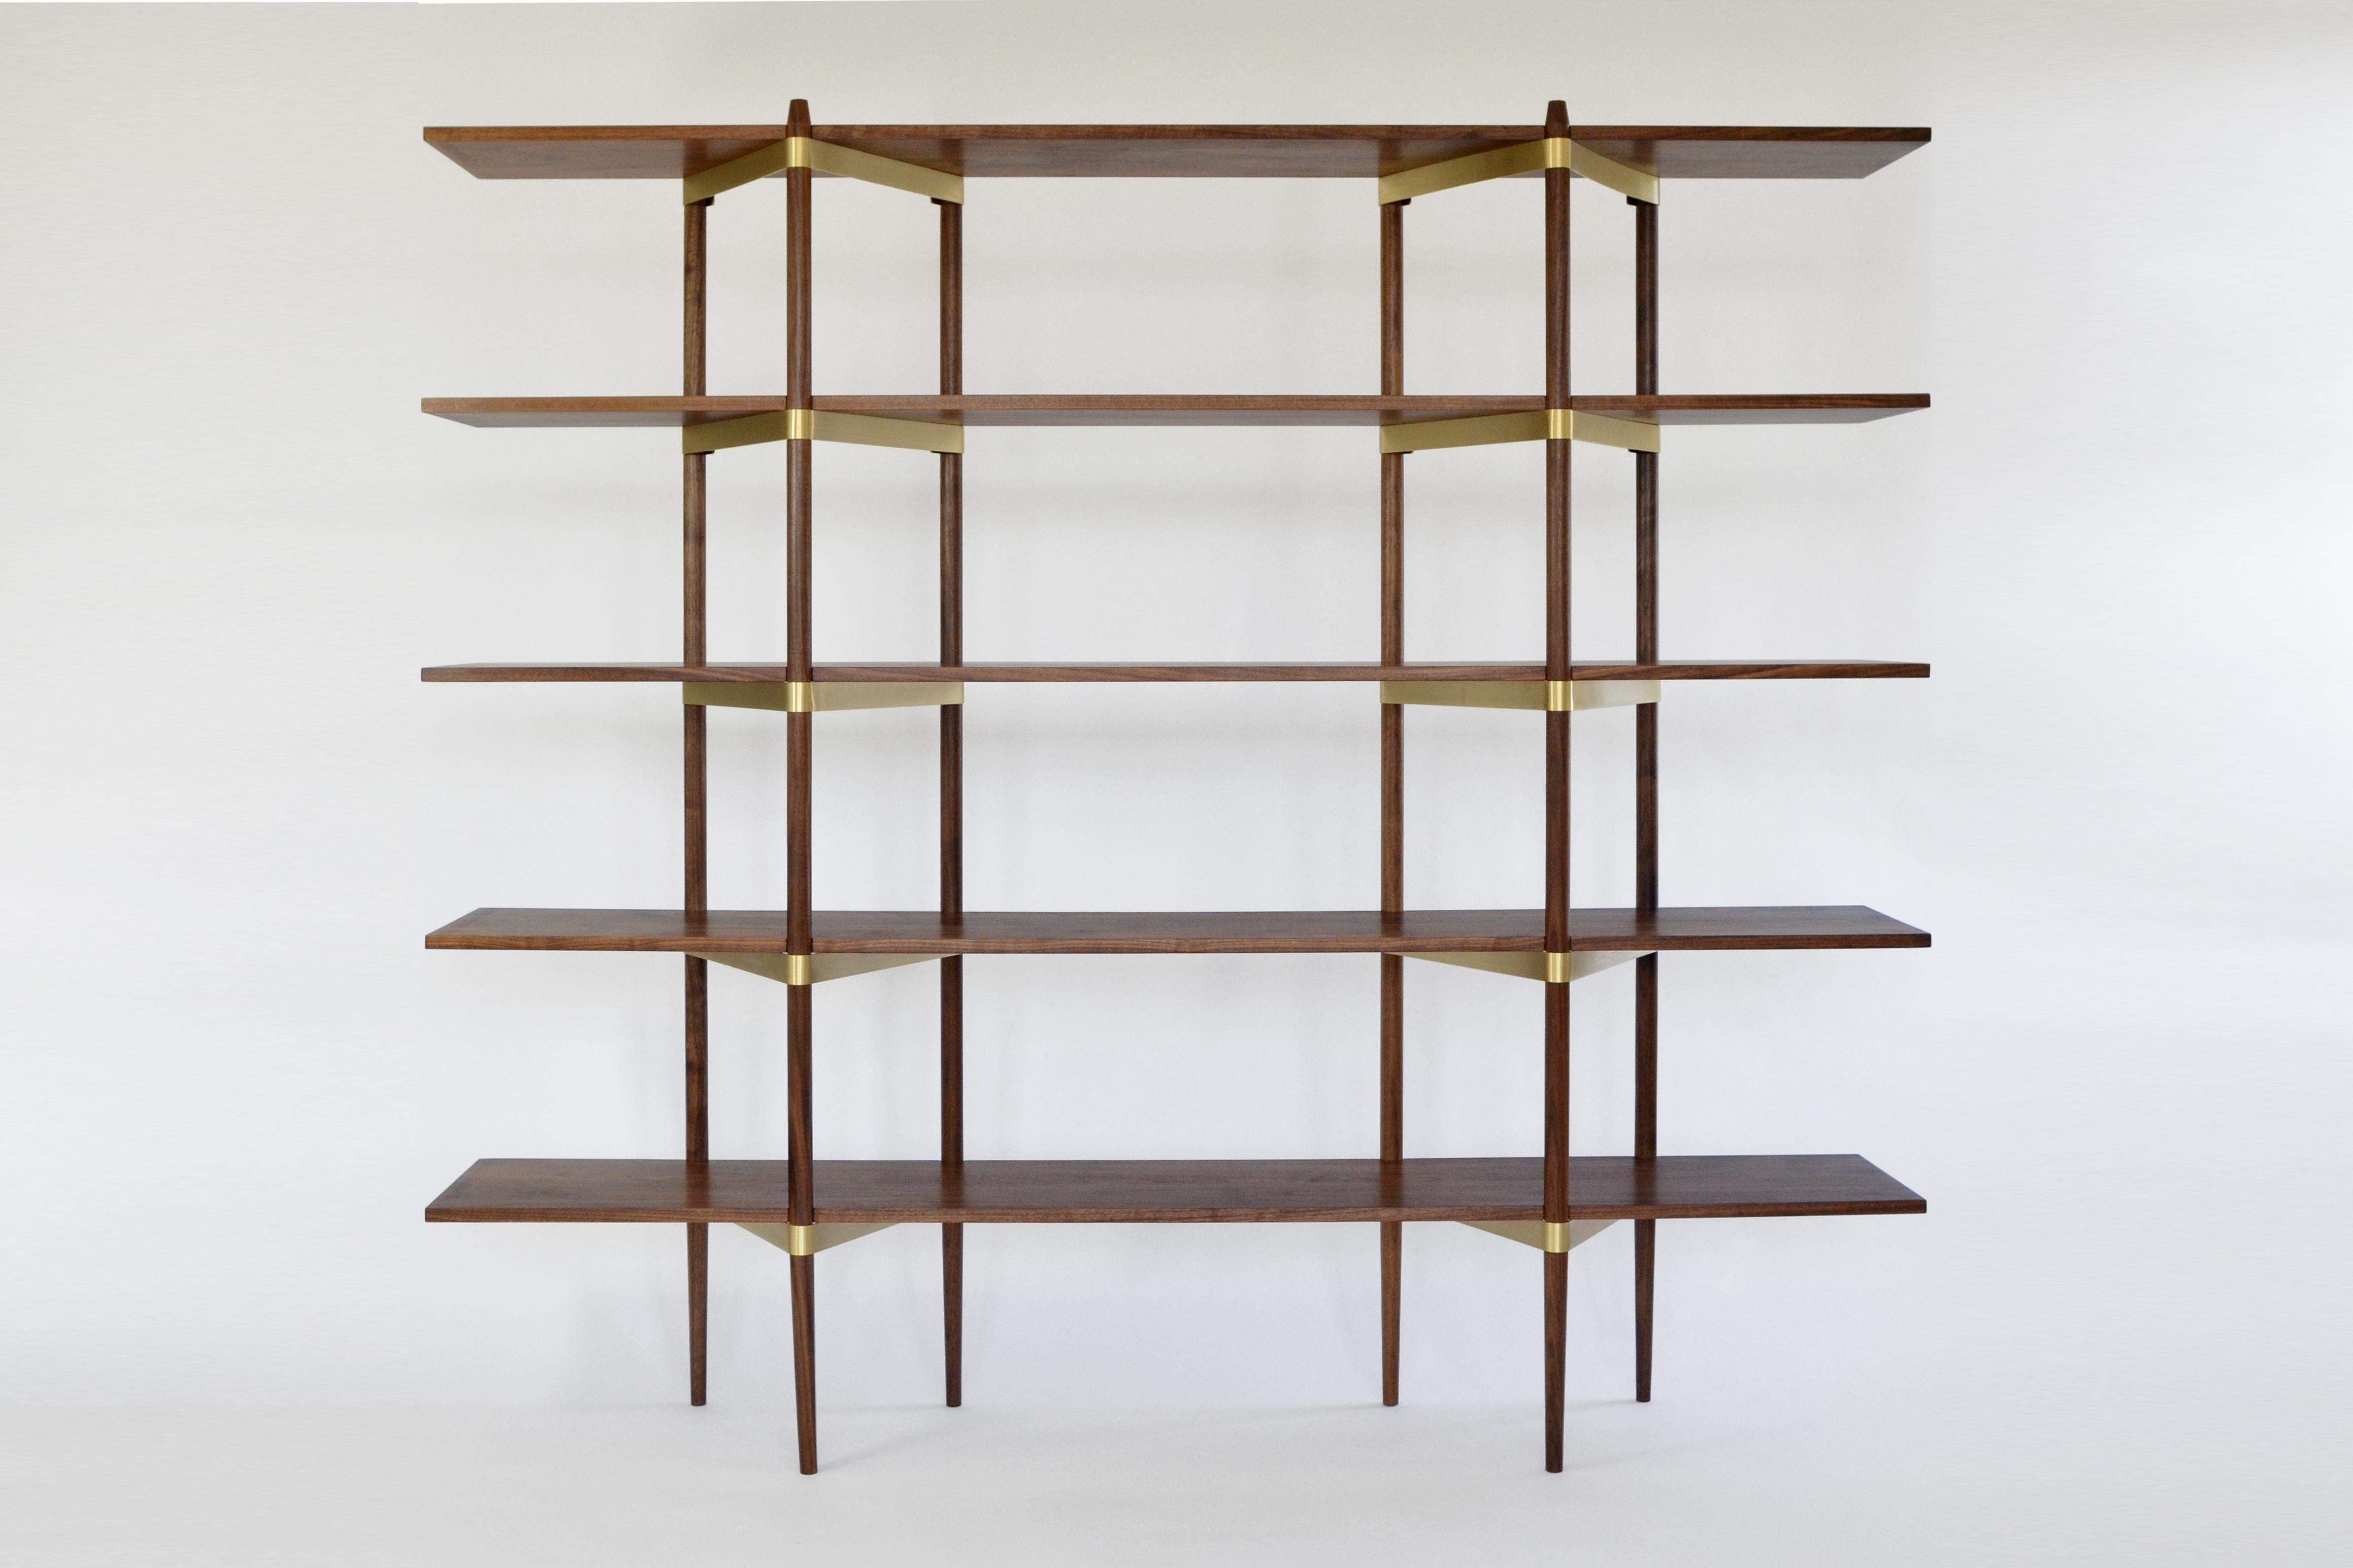 “Shelving can be the most mundane thing you own, or it can be the beautiful bones of a room as pleasing to see as anything it displays. Casey Lurie’s Primo system would be the latter.”
William L. Hamilton, The wall street journal

The Primo shelving